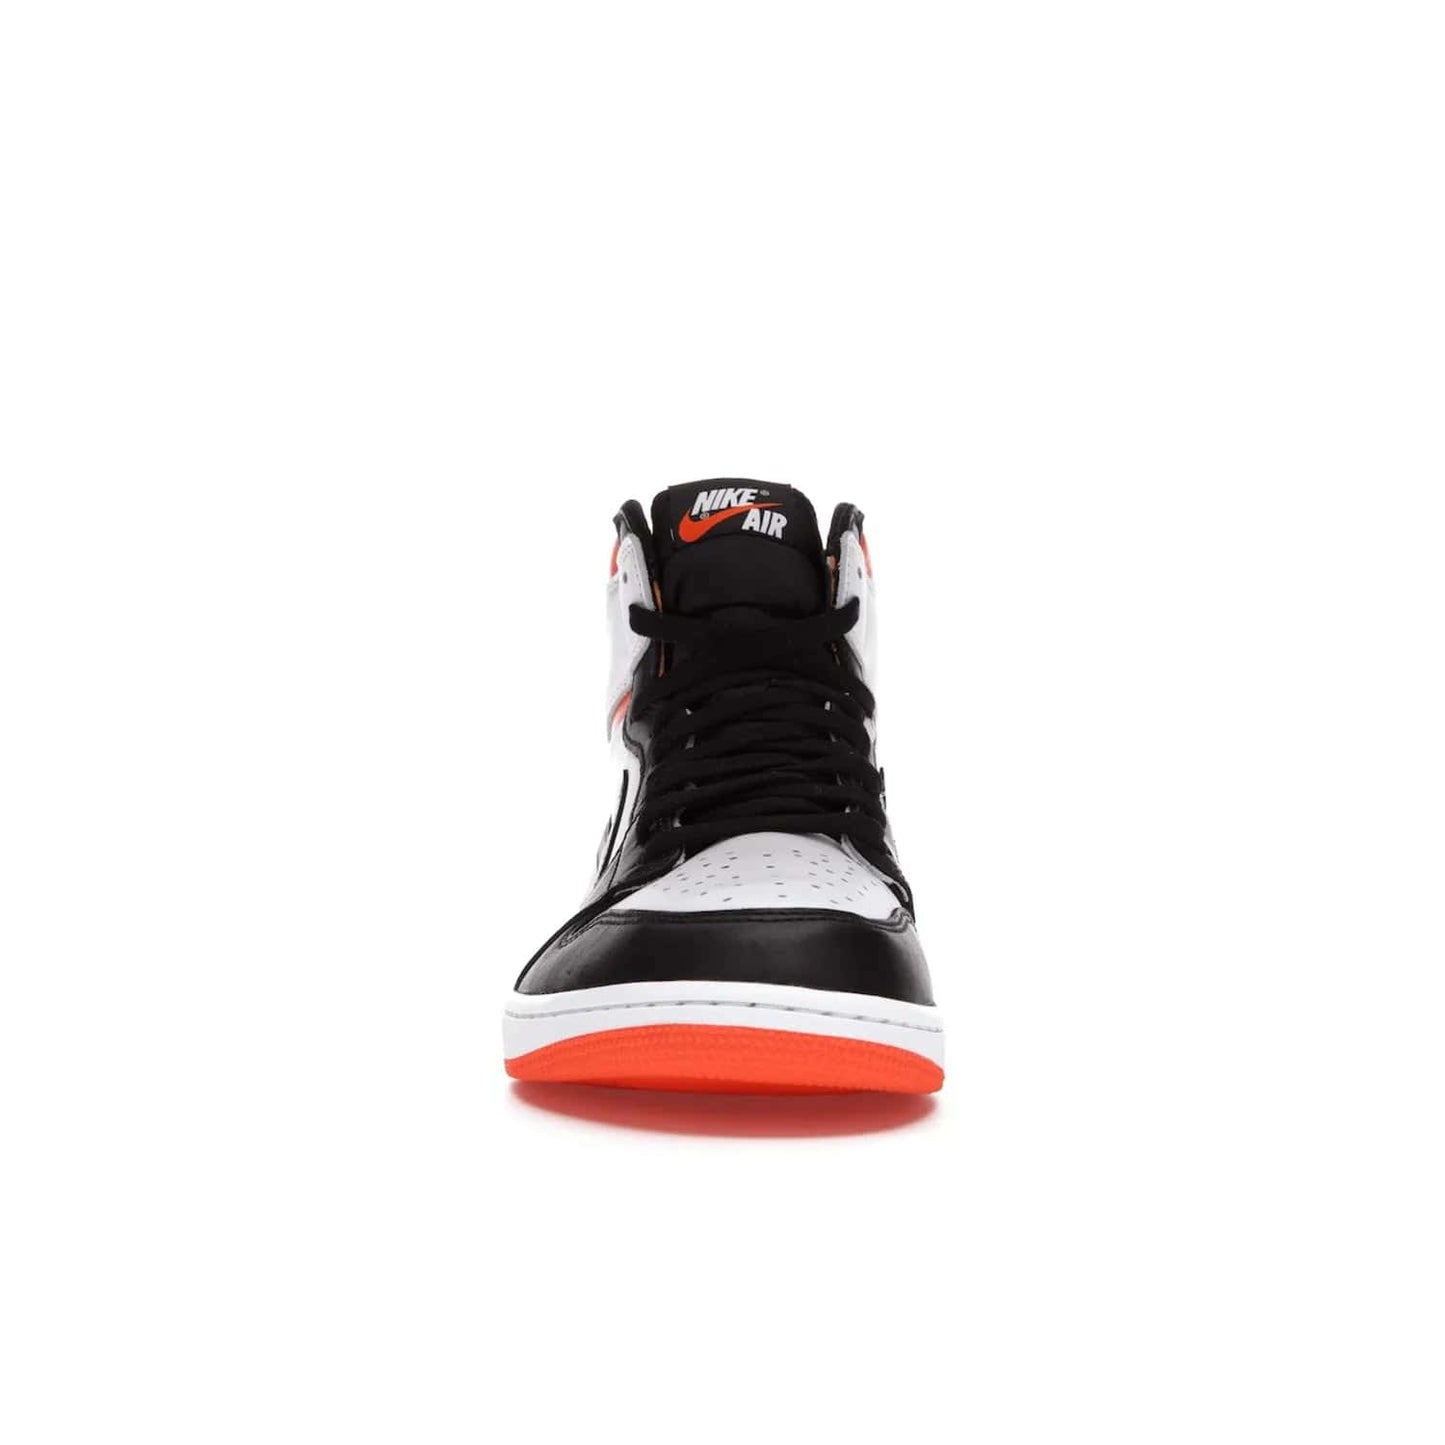 Jordan 1 Retro High Electro Orange - Image 10 - Only at www.BallersClubKickz.com - This Air Jordan 1 Retro High Electro Orange features a white leather upper with black overlays and vibrant Hyper Orange ankle wrap. Turn heads with this iconic design of woven tongue label and sole. Get yours today and add some serious style to your rotation.